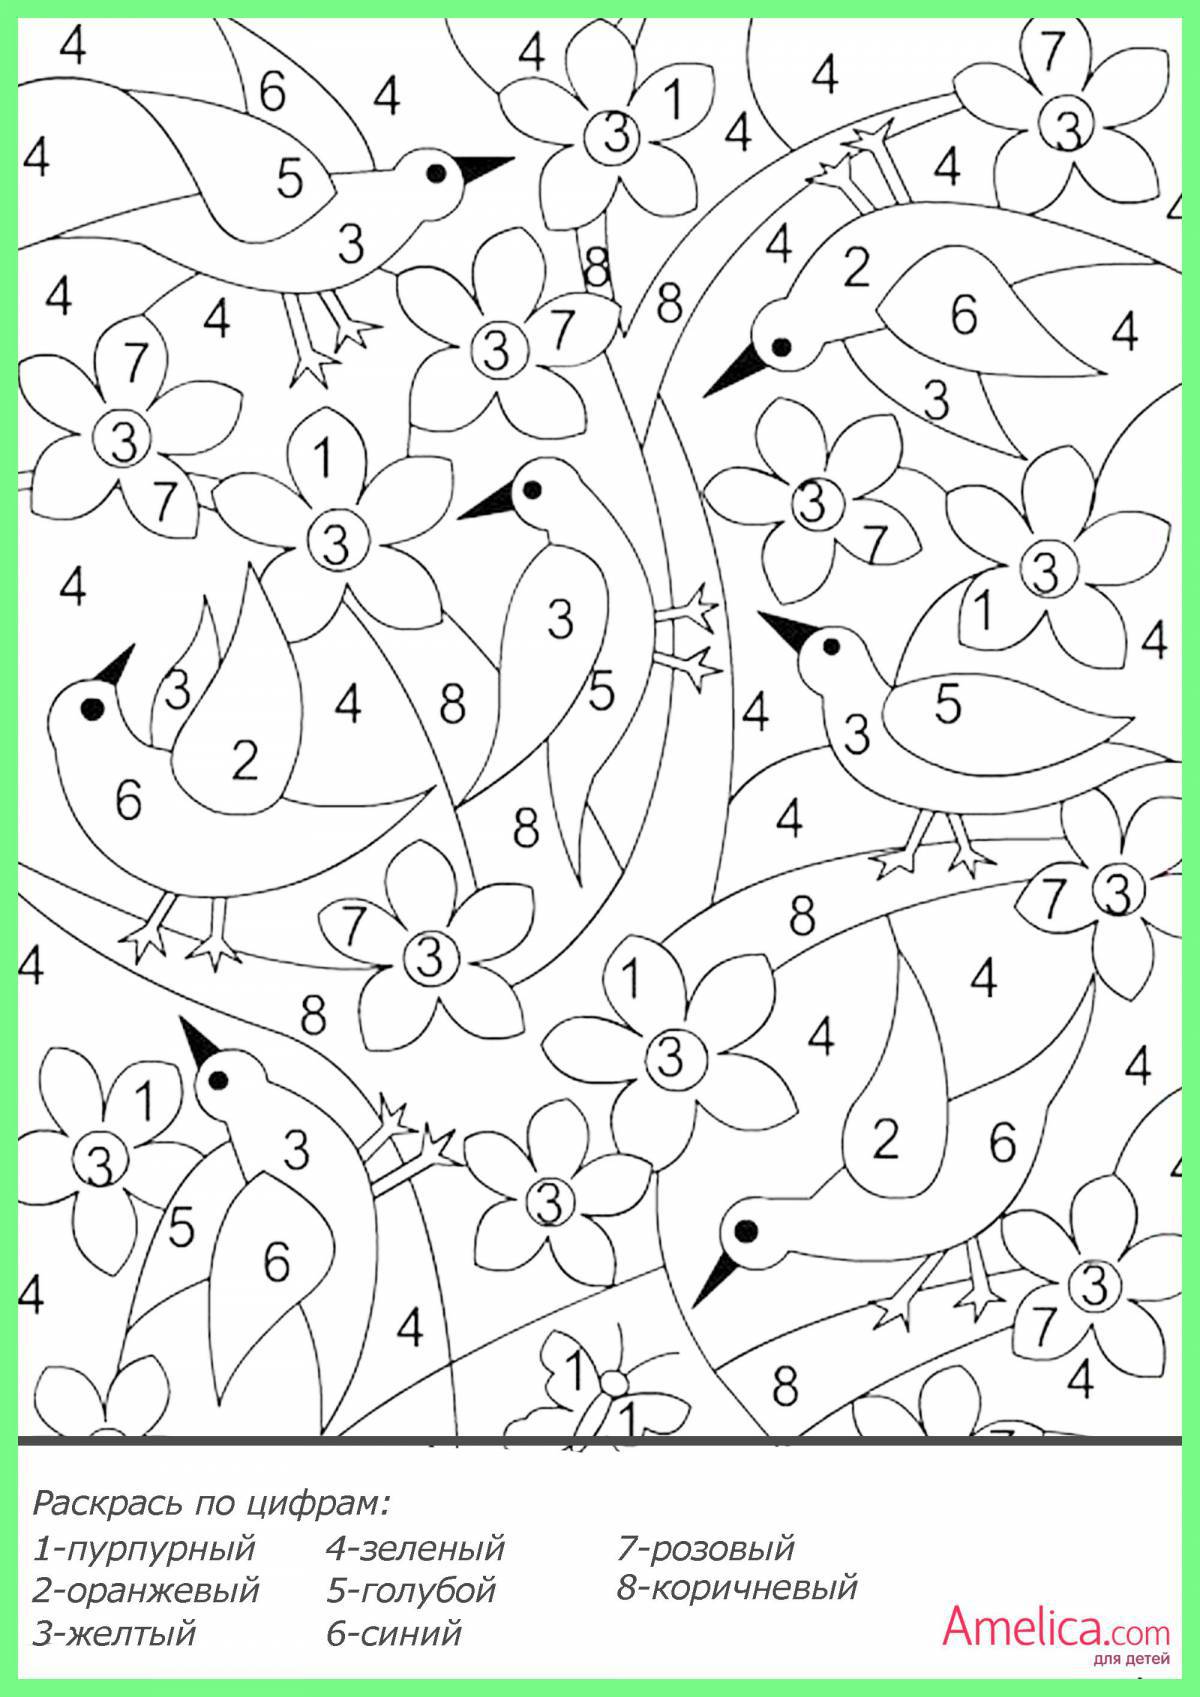 Intriguing coloring by numbers for children 5-6 years old